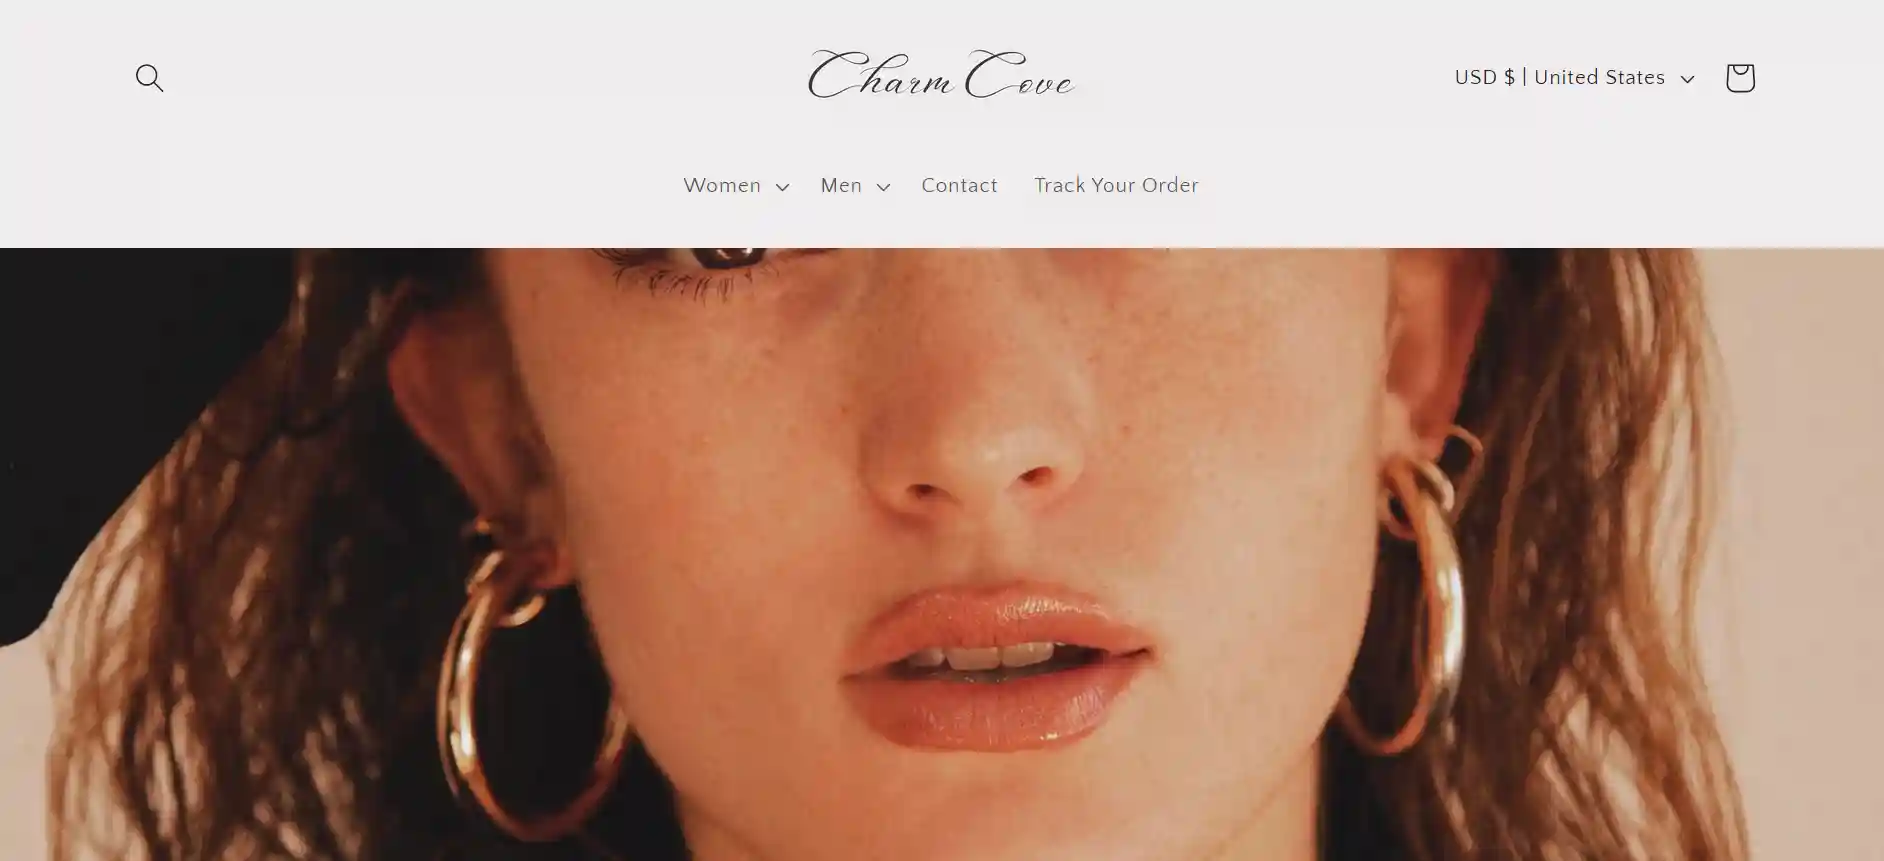 You are currently viewing The Charm Cove Scam – Fake Thecharmcove.Com Jewelry Store